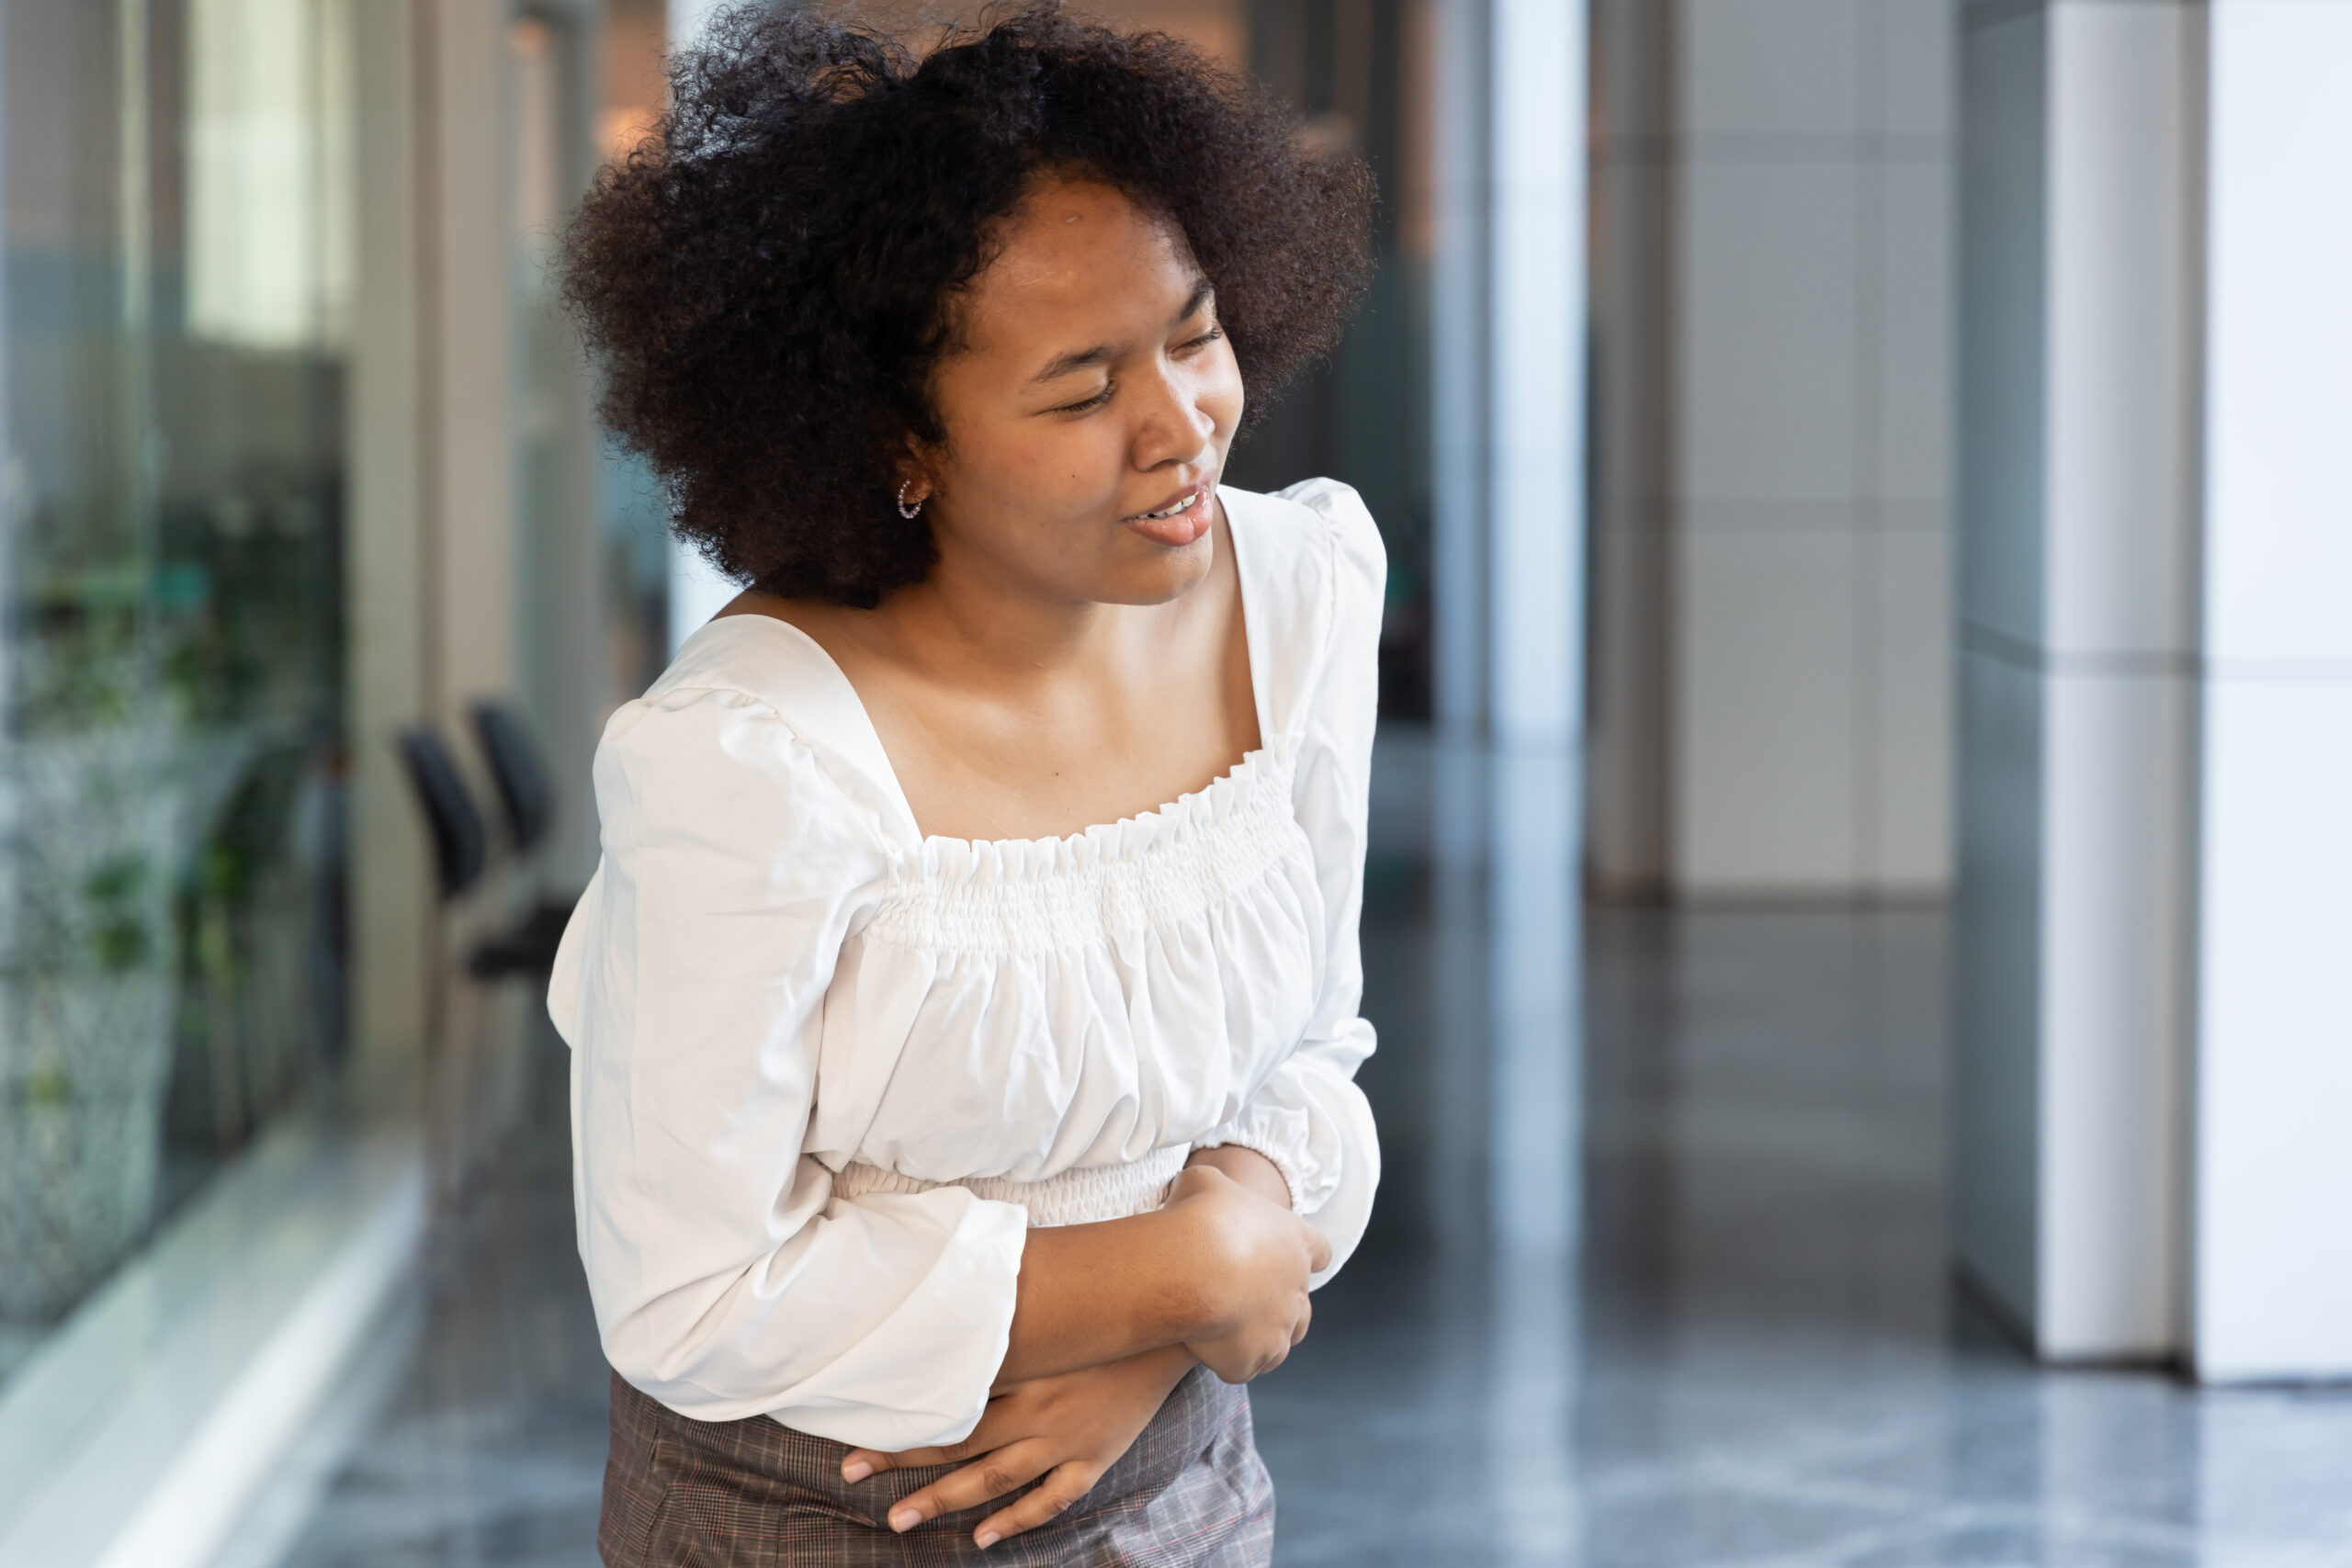 African woman with stomach ache, concept image of menstrual period cramp, abdominal pain, food poisoning, gastritis, acid reflux or colon cancer